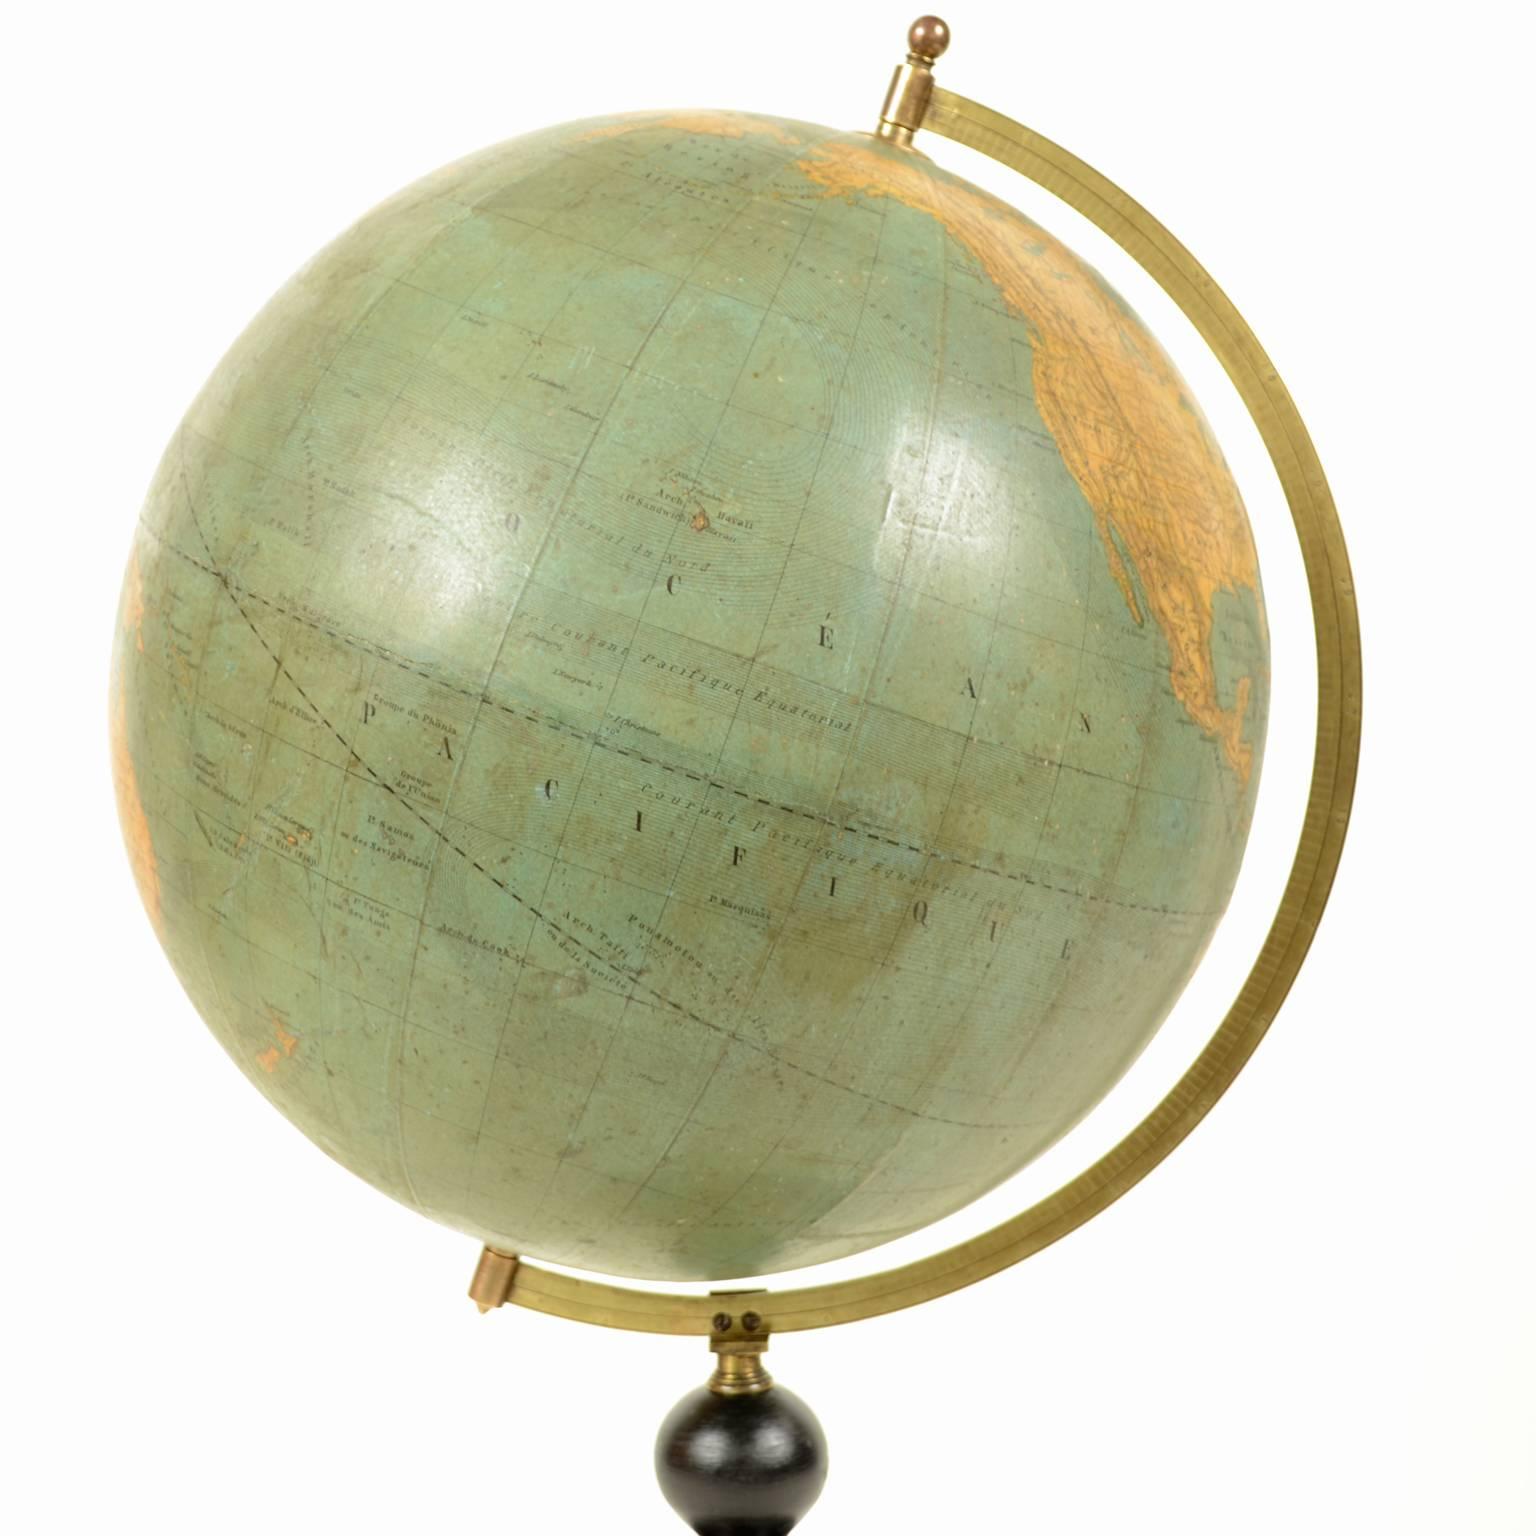 Terrestrial globe edited in the mid-19th century in Paris by M. Vivien de Saint Martin. There are territorial maps and oceanic currents. Turned and ebonized wooden base, papier mâché sphere. Good condition. Height cm 58.5, diameter of sphere cm 30.